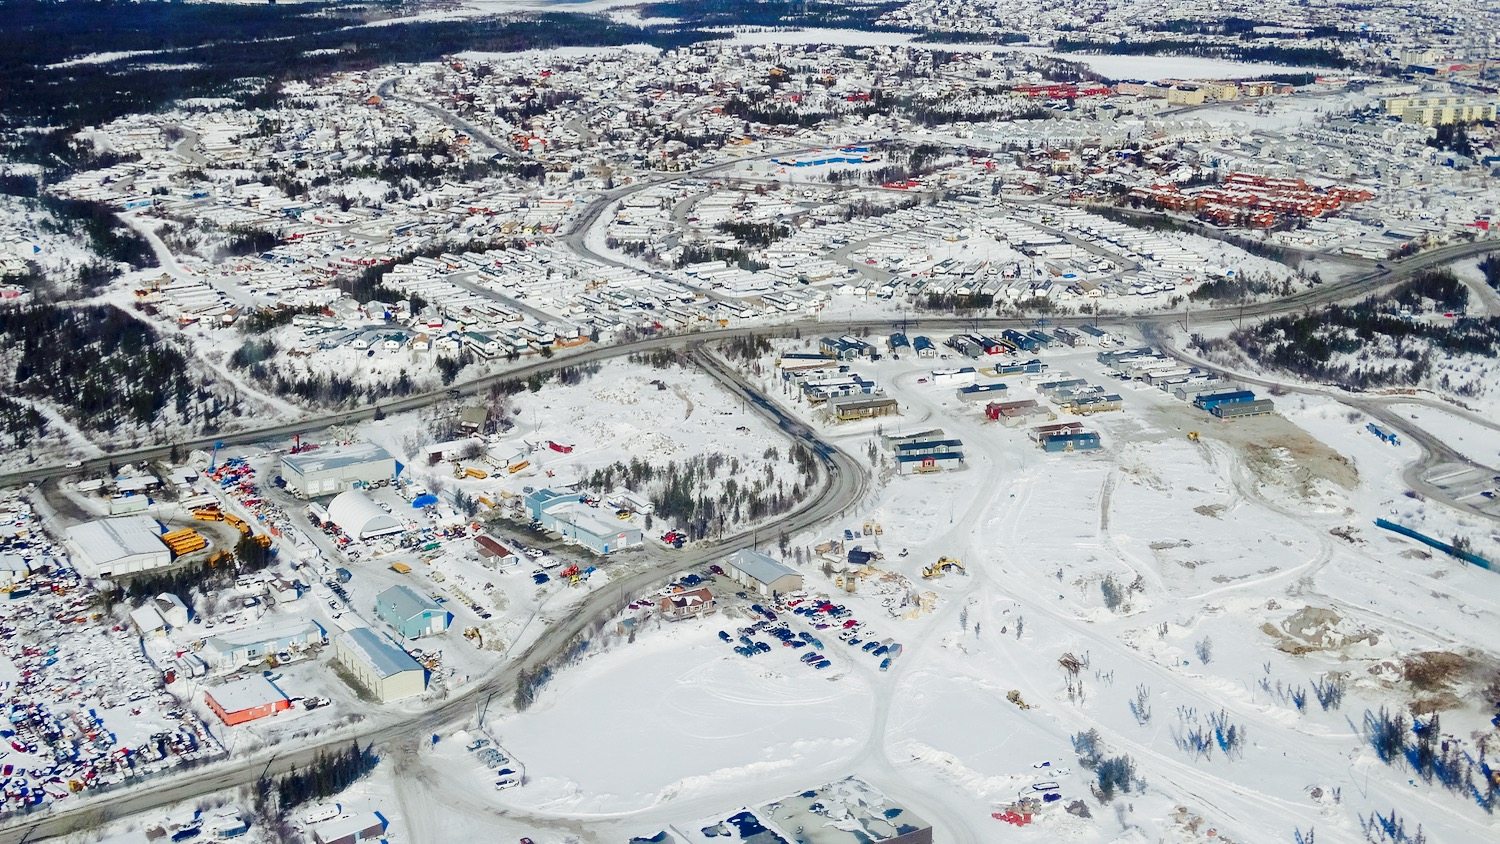 Weather agency predicts warm, wet spring for Yellowknife - My Yellowknife Now